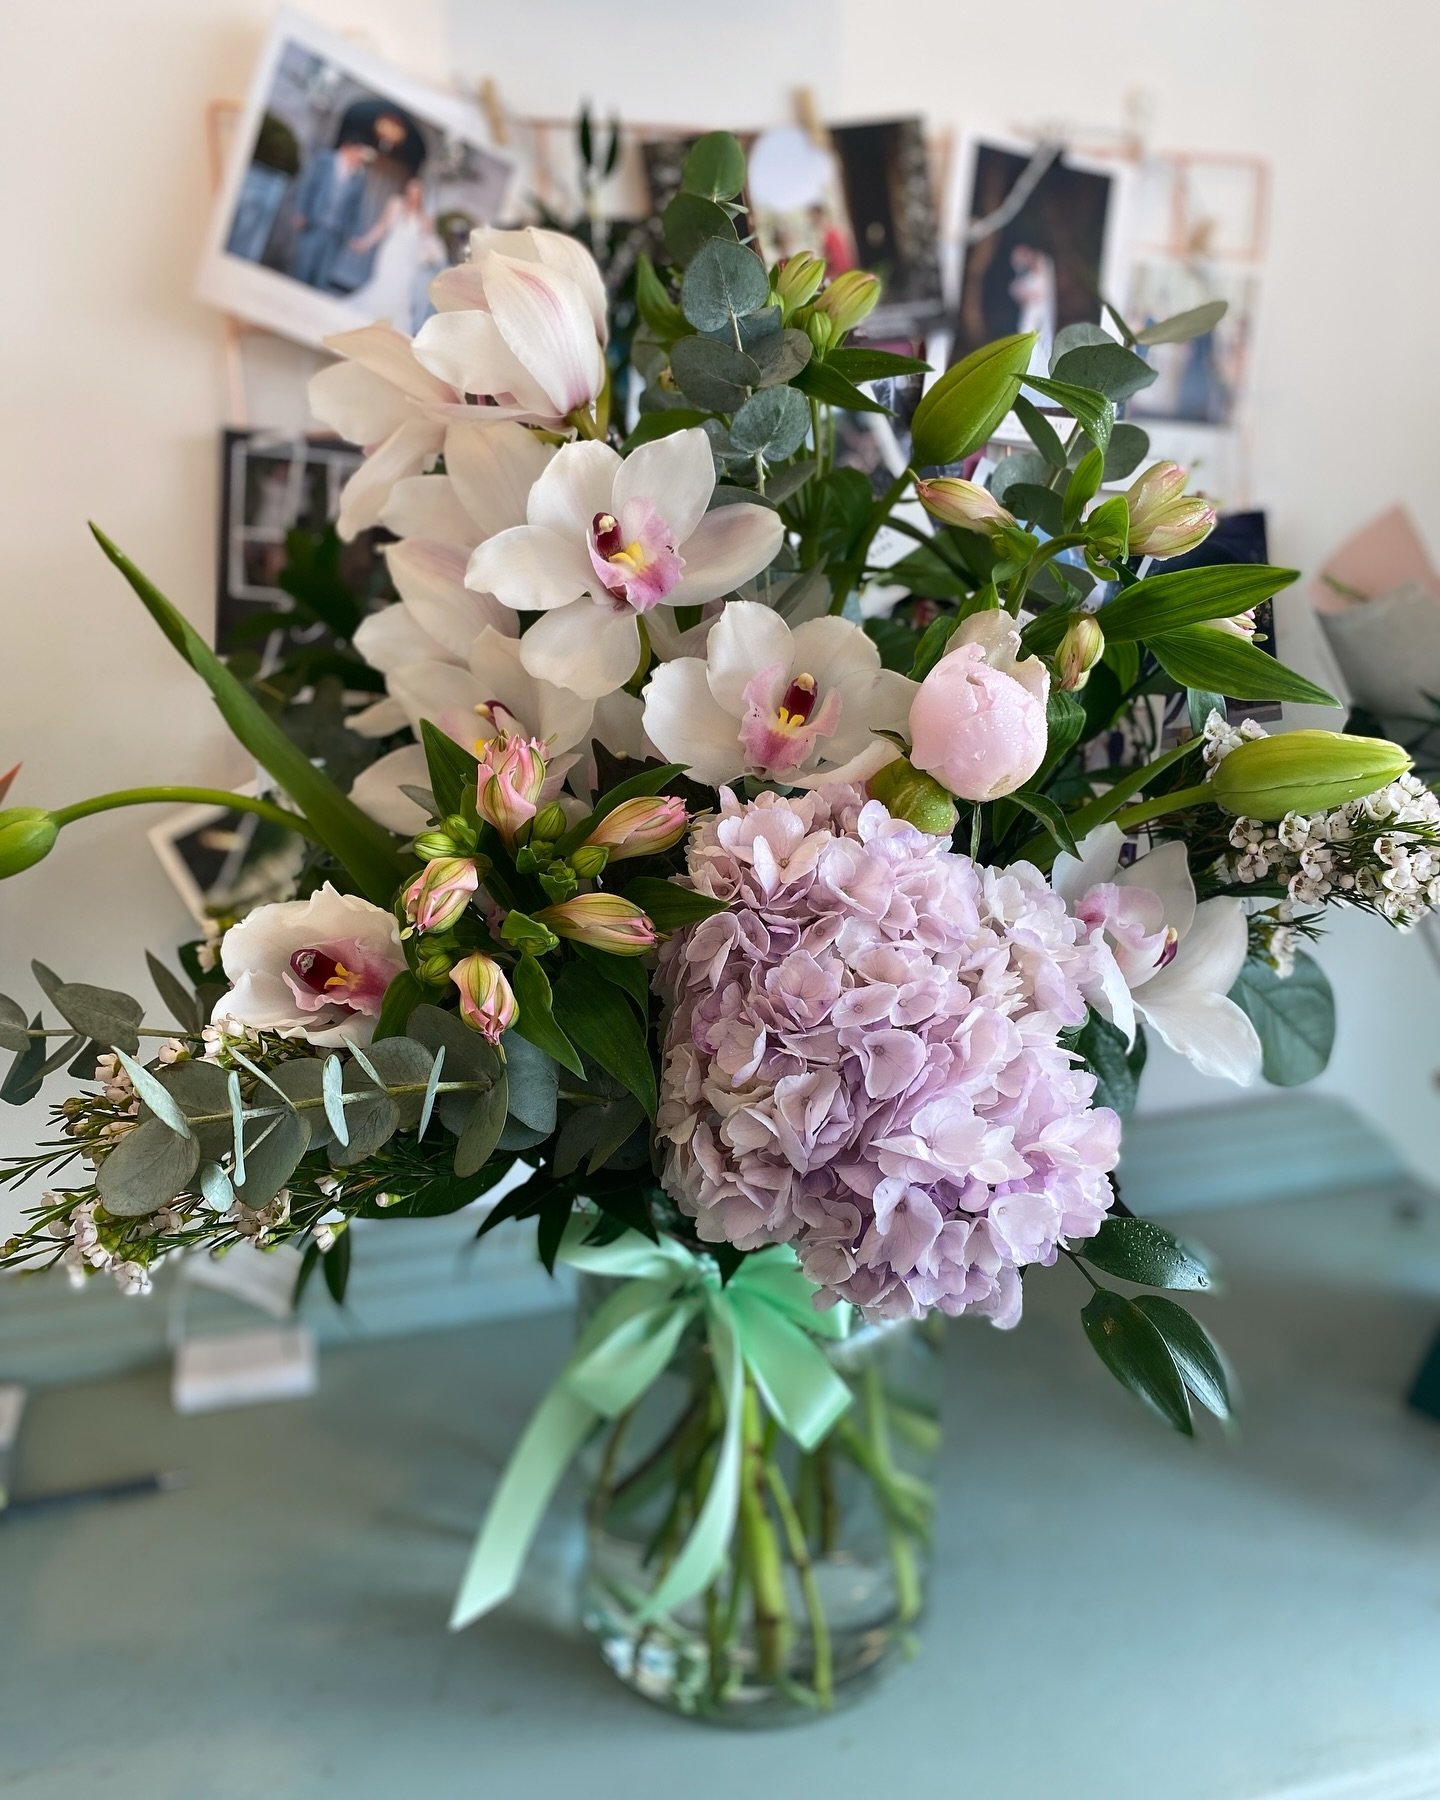 A beautiful vase arrangement for a lovely corporate client of ours 💐 
#officeflowers #receptionflowers #herefordflorist